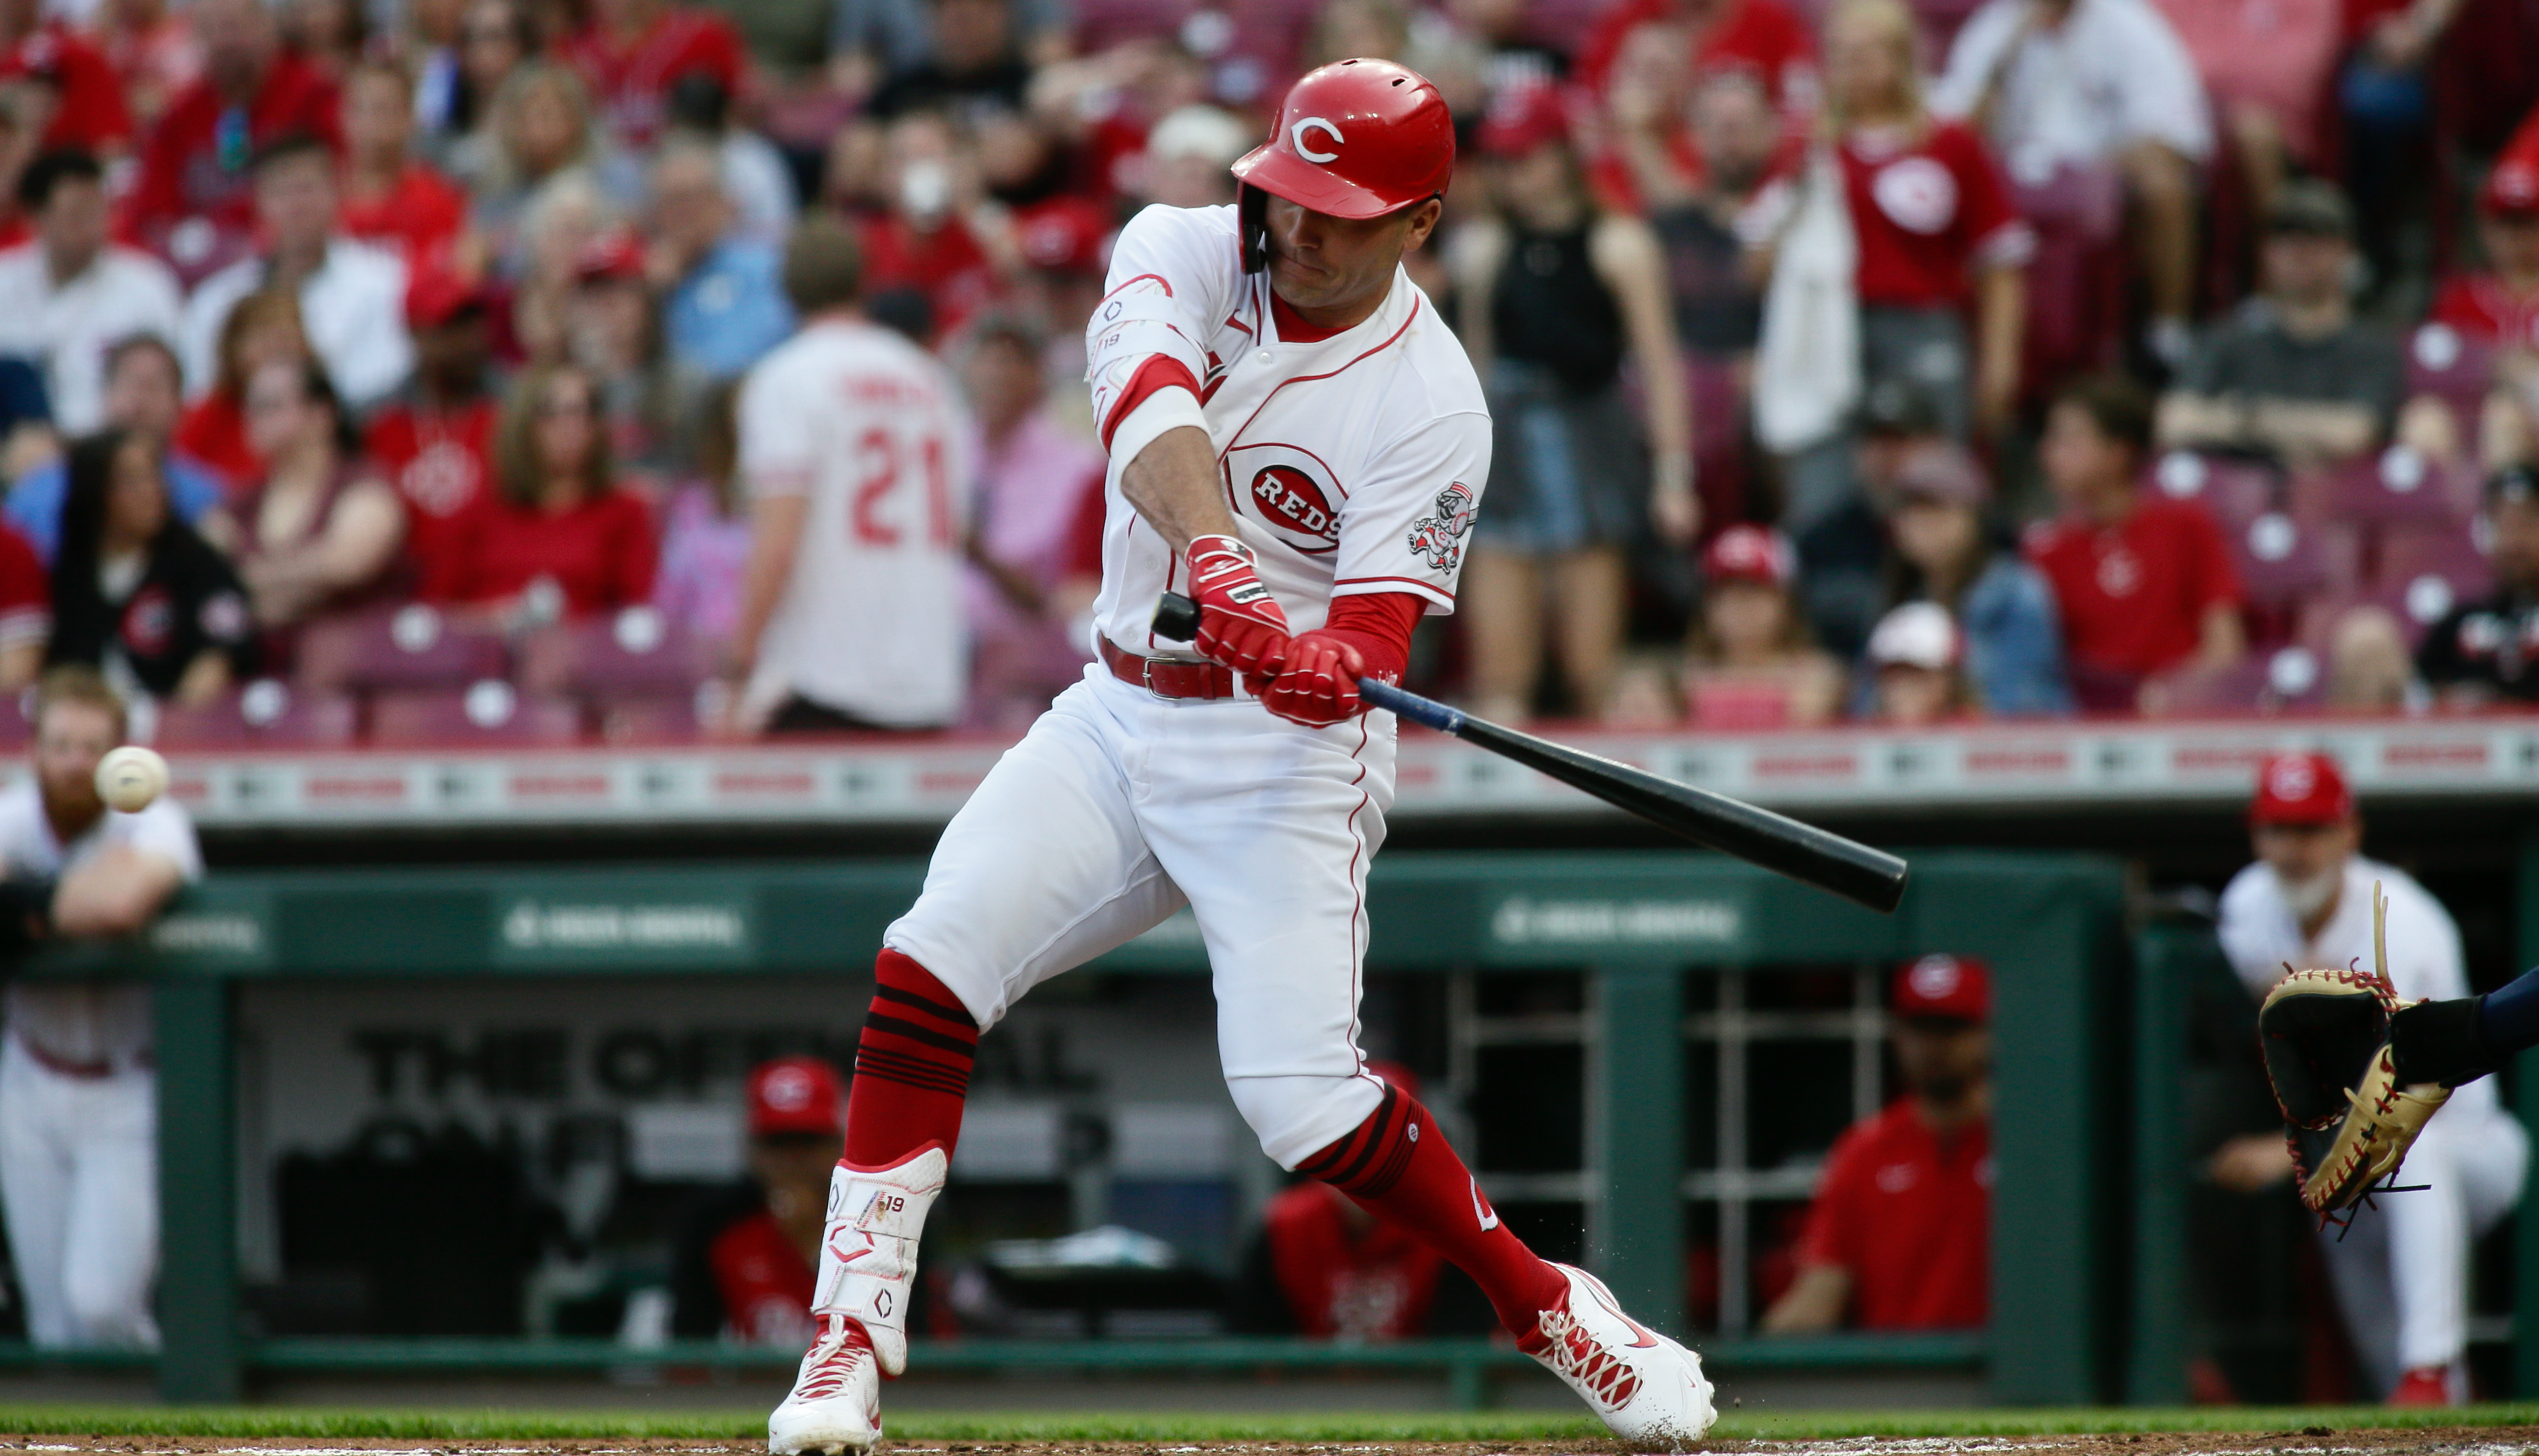 Reds' Joey Votto to have season-ending surgery